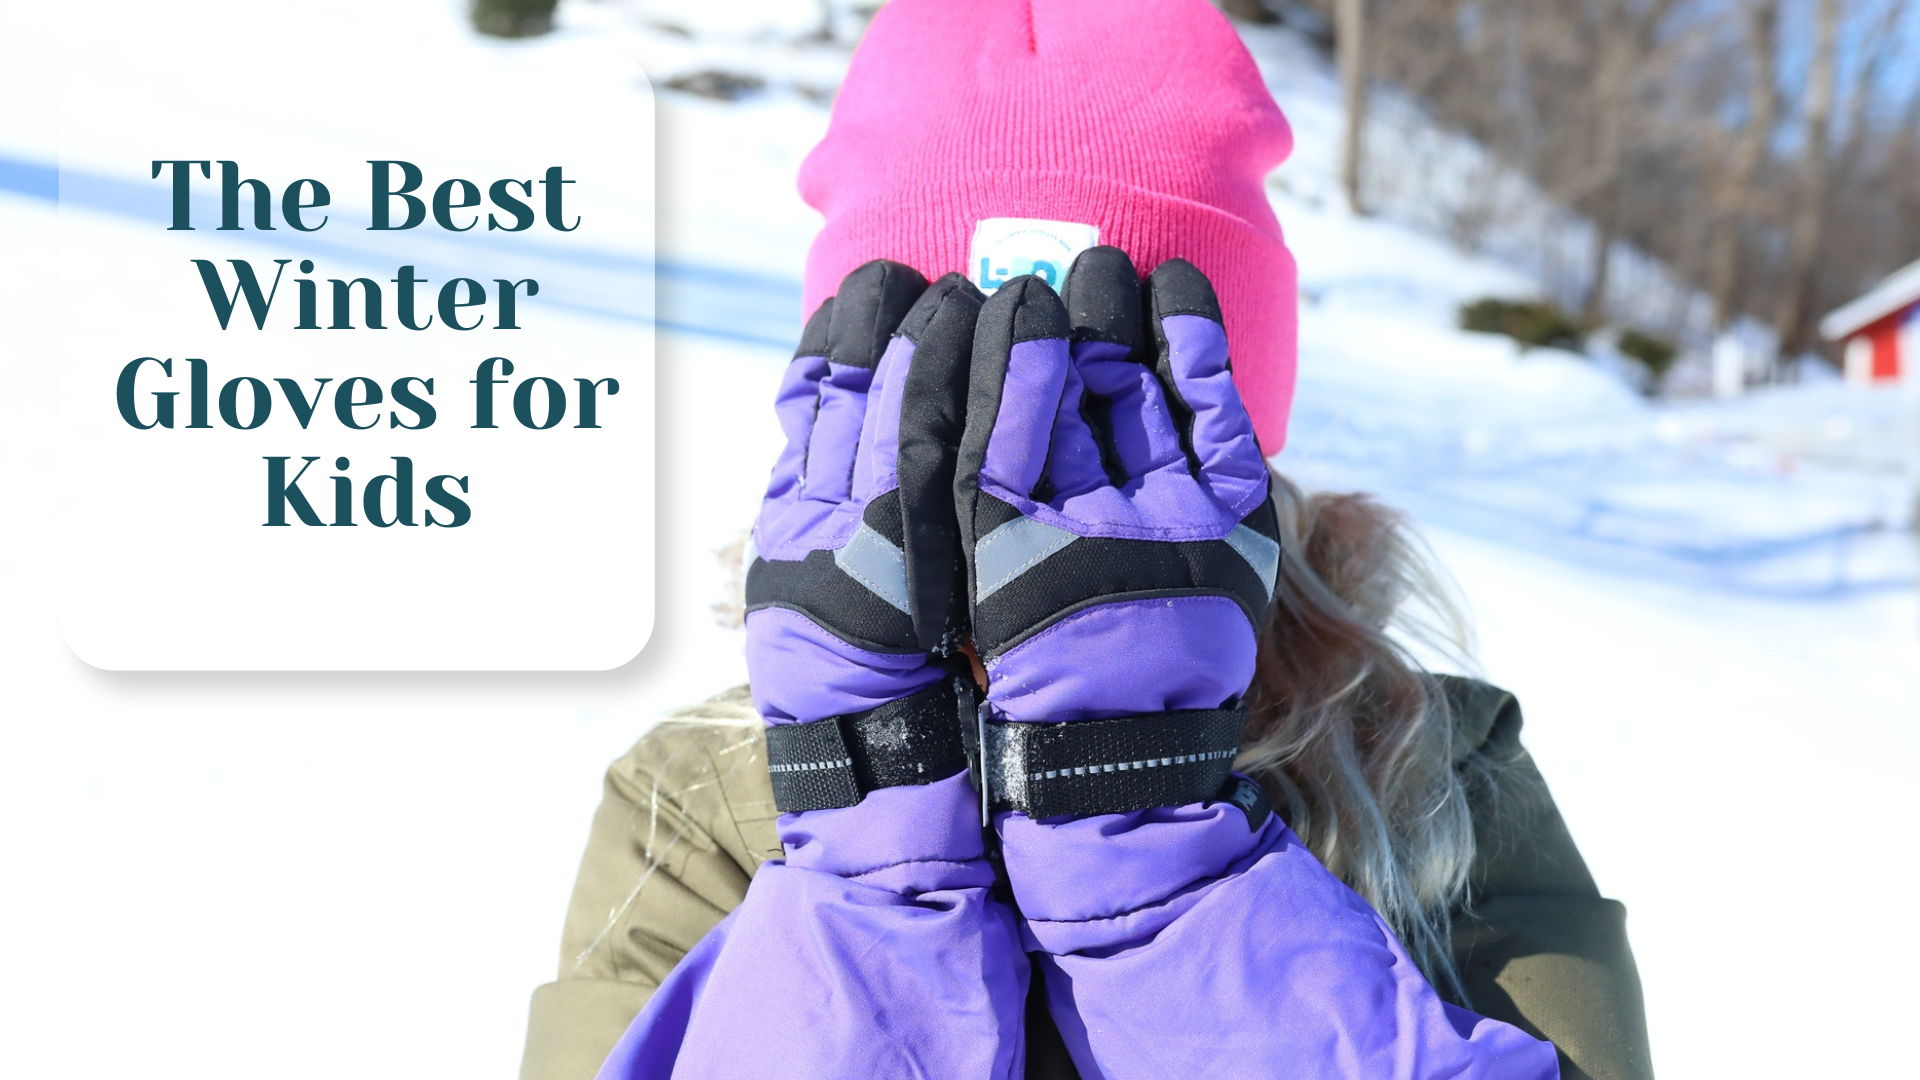 Gloves for Kids: A Complete Guide for Parents